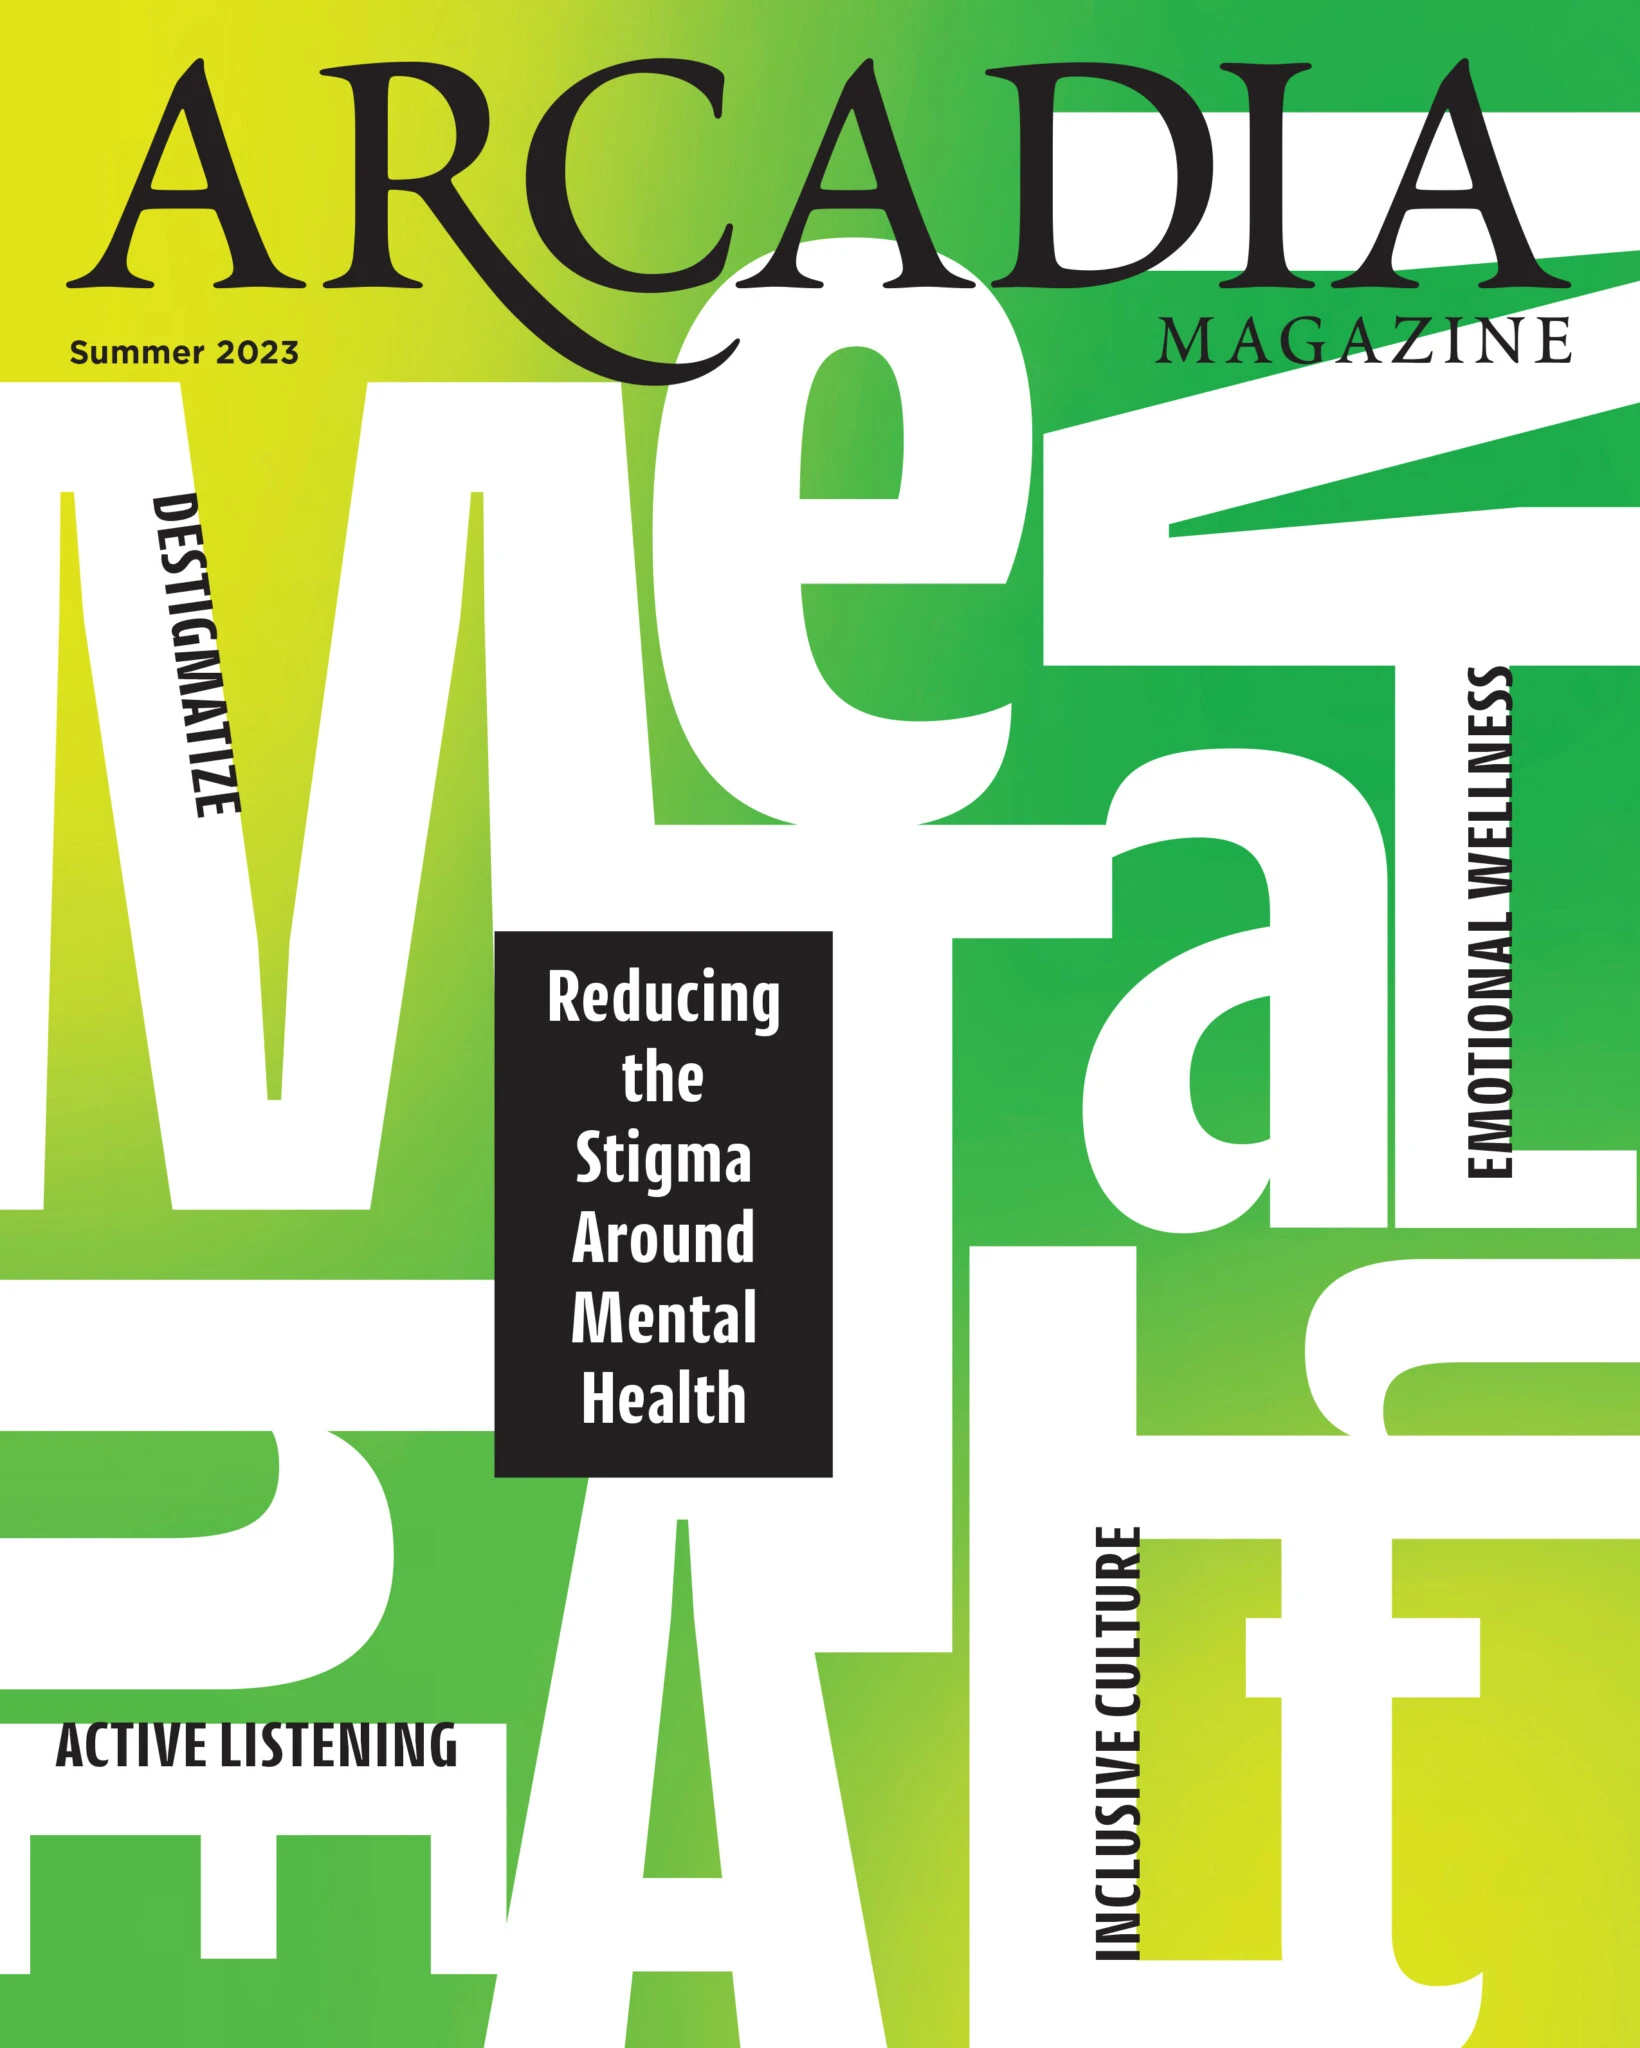 White text over a green and yellow background form the cover of Arcadia Magazine 2023.